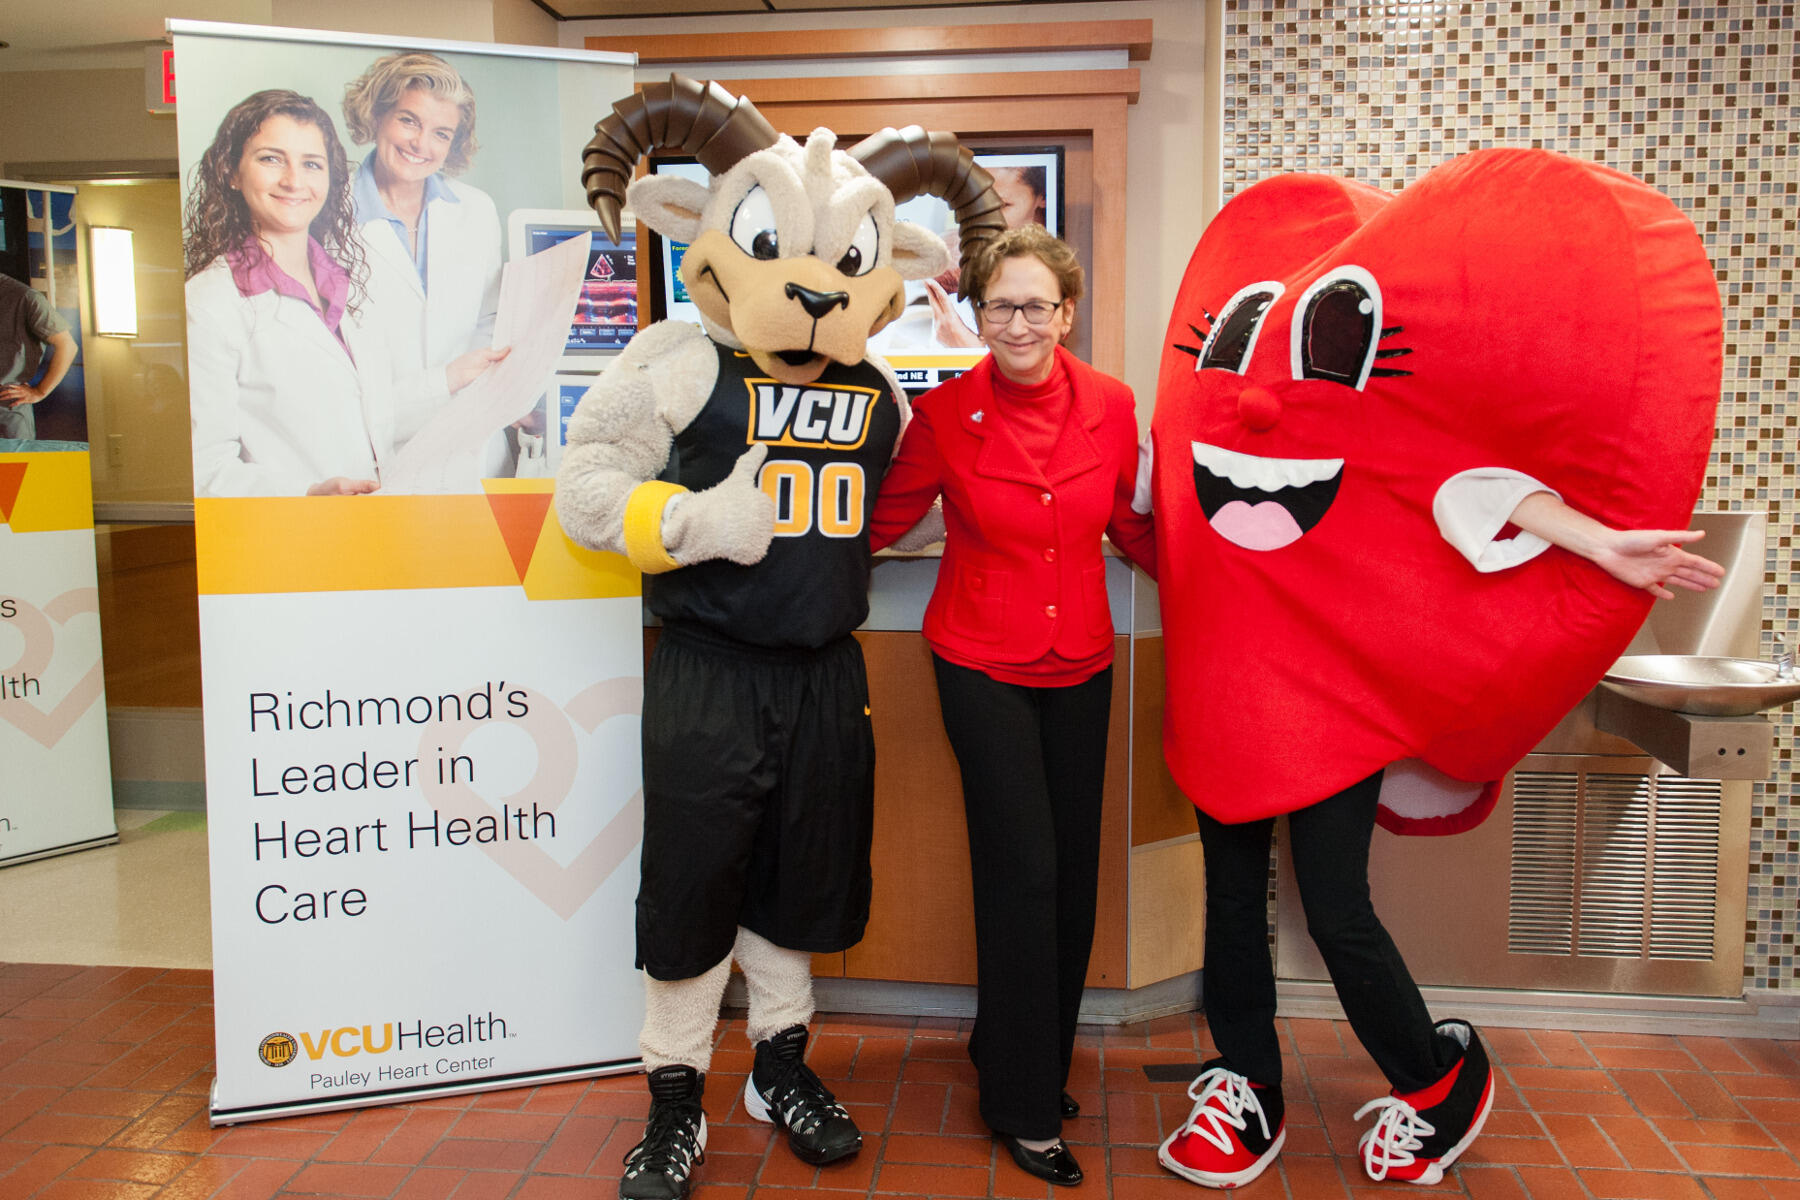 Marsha Rappley, M.D., CEO of VCU Health and vice president of health sciences at VCU.